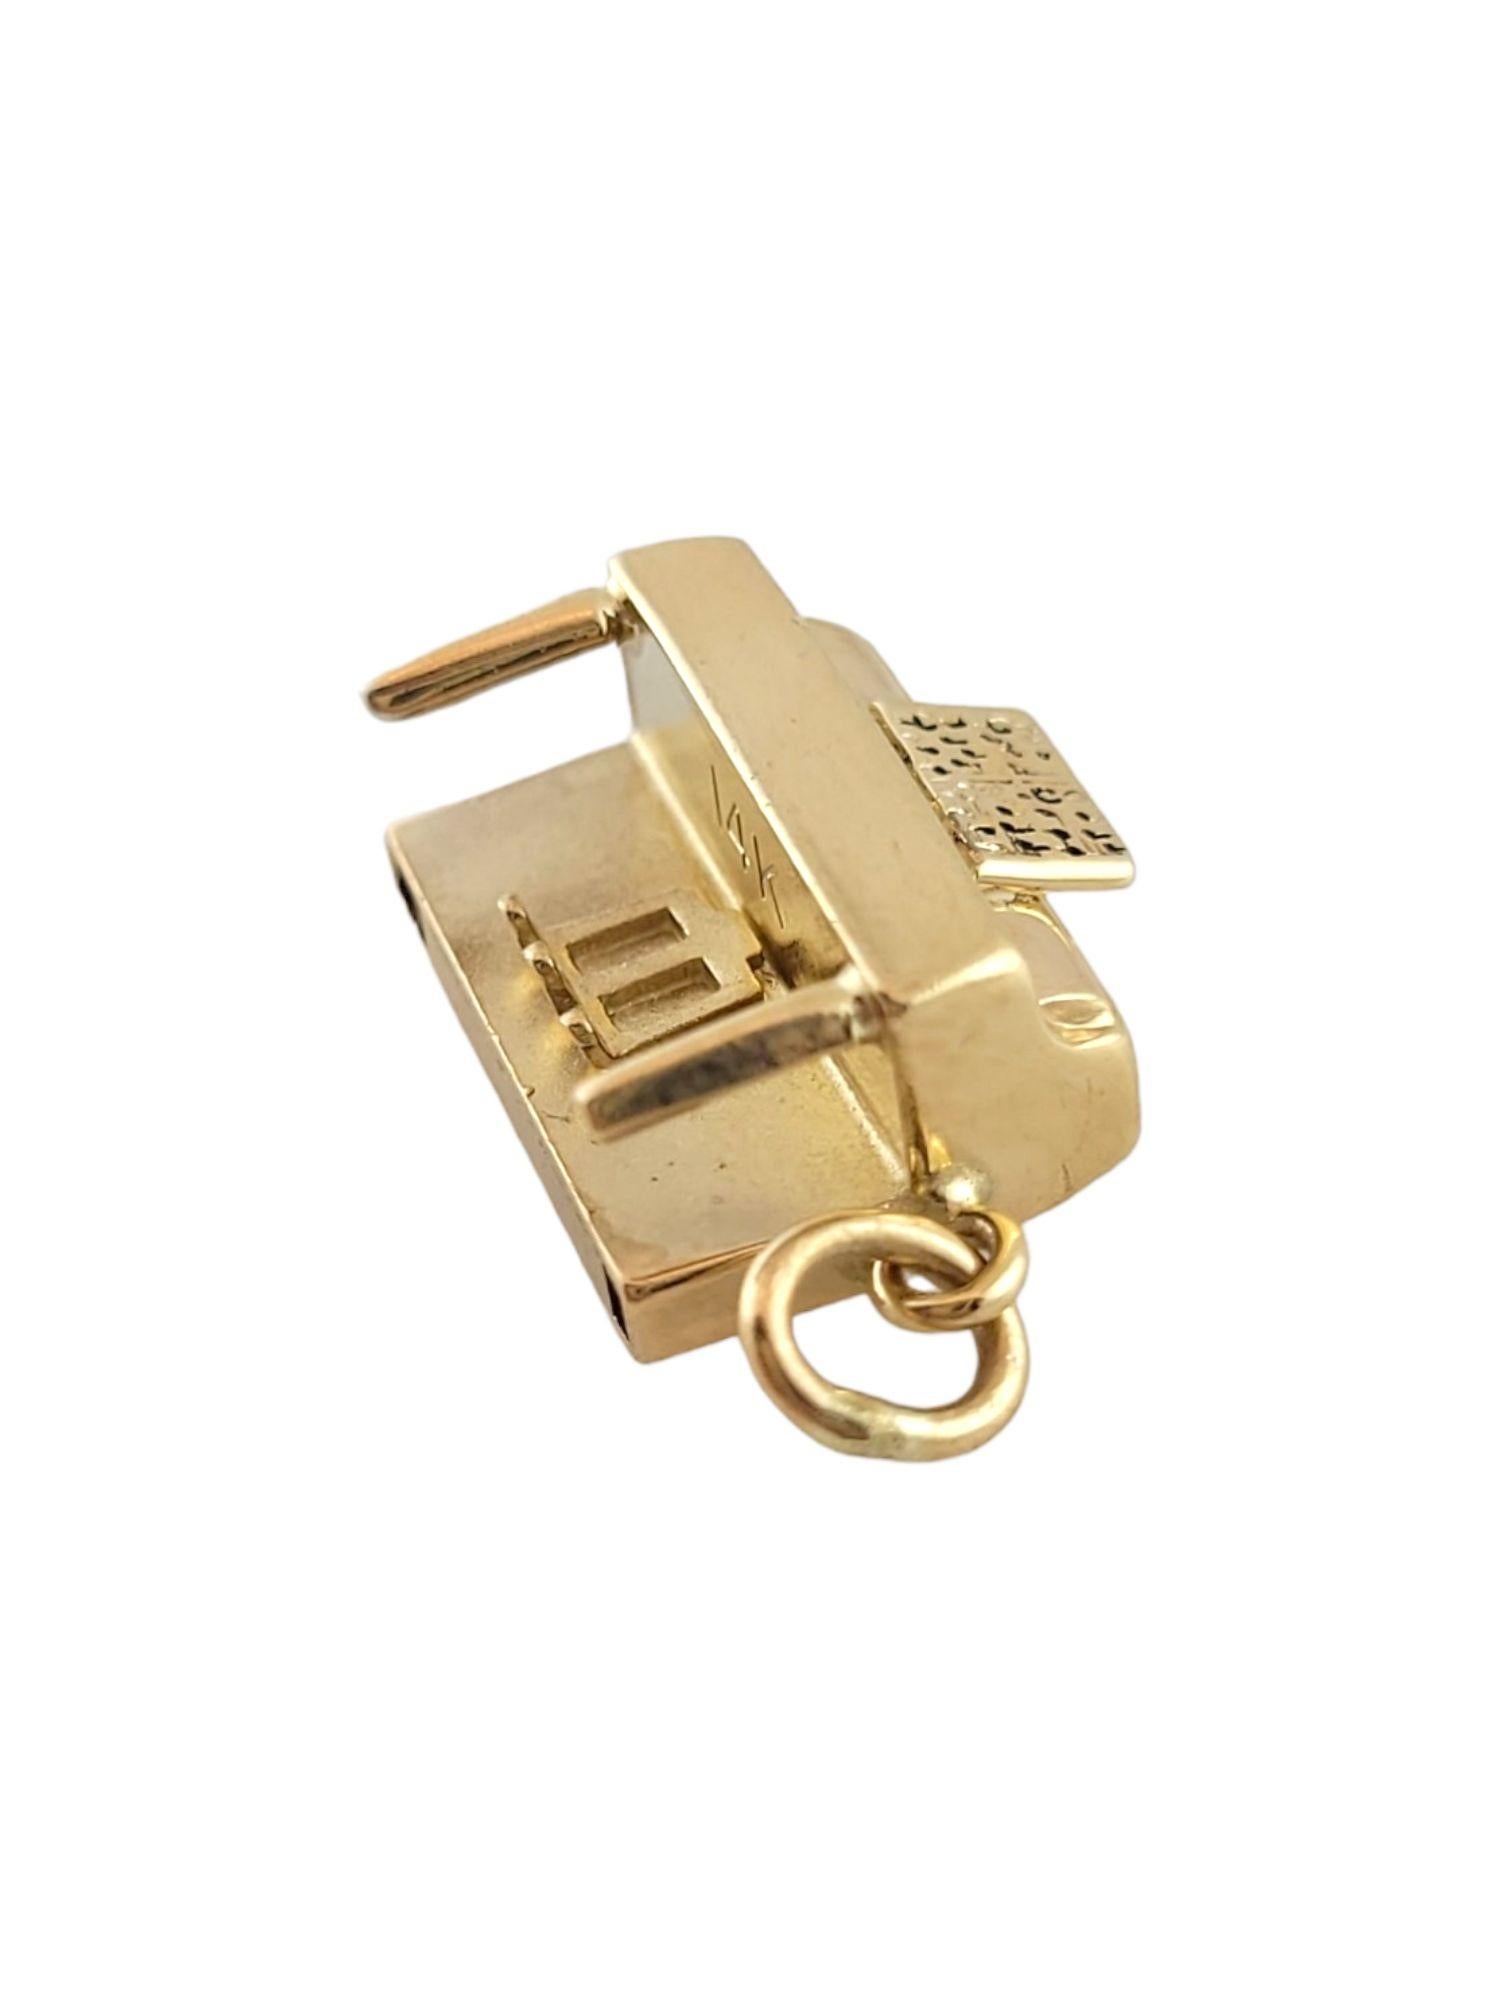 Vintage 14K Yellow Gold Organ Charm

This organ charm is crafted from 14K yellow gold and makes a great gift fir music/instrument lovers!

Size: 11.6mm X 16.4mm X 6.5mm

Weight: 2.32 g/ 1.5 dwt

Hallmark: 14K

Very good condition, professionally